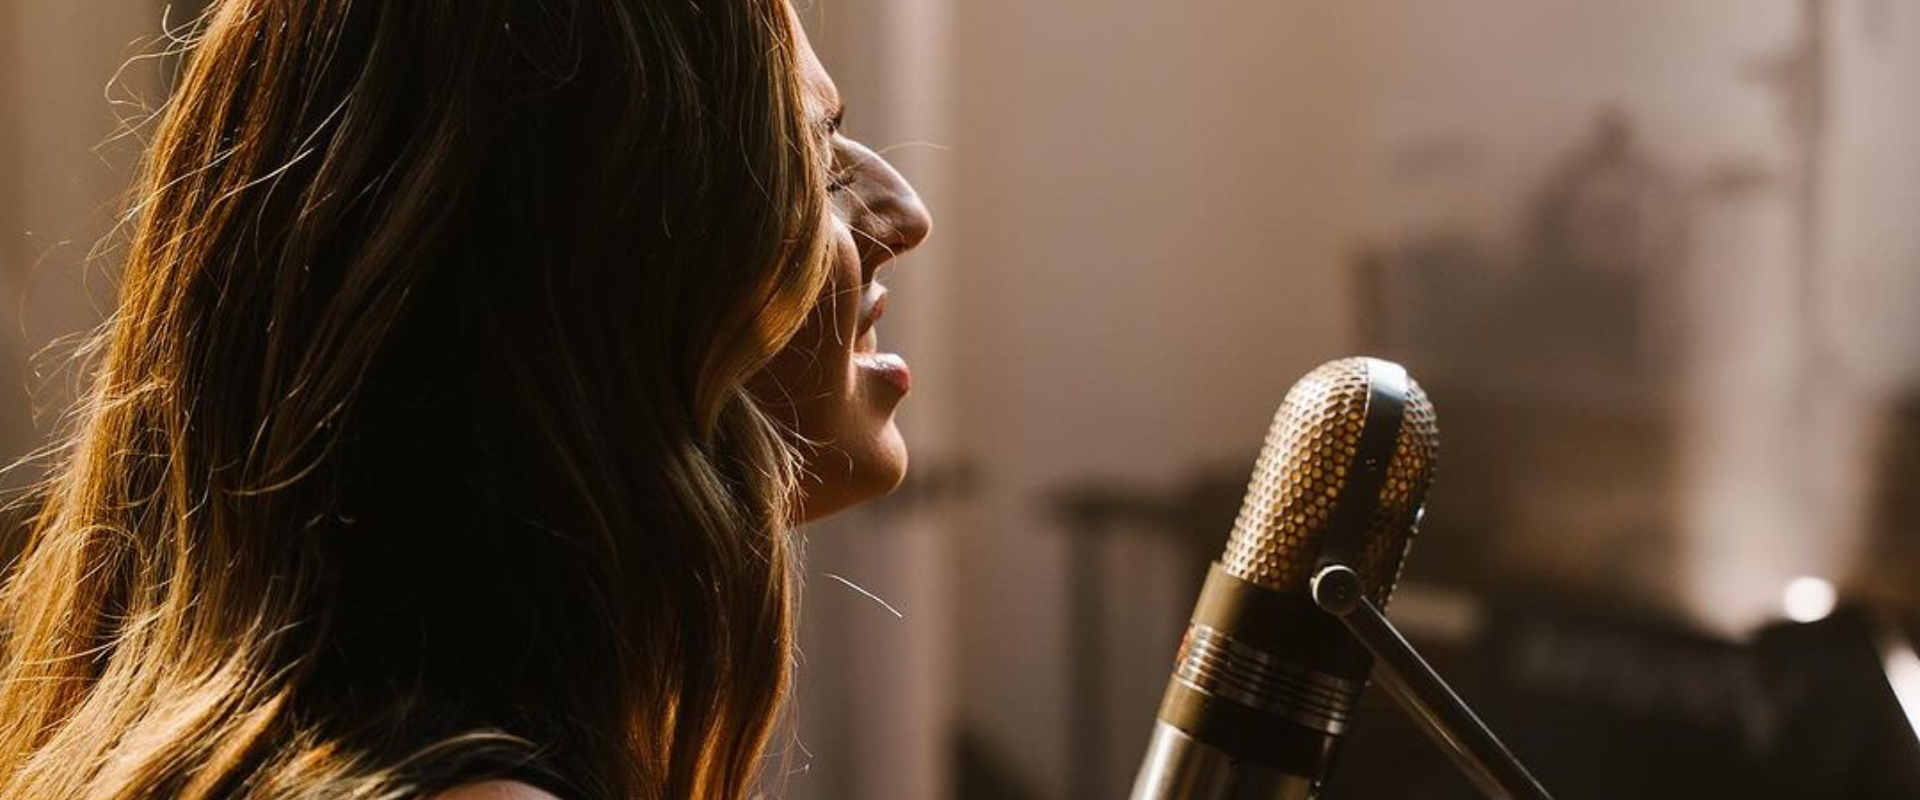 Brooke Ligertwood Records New Music Videos With Billy Graham’s Vintage RCA Microphone